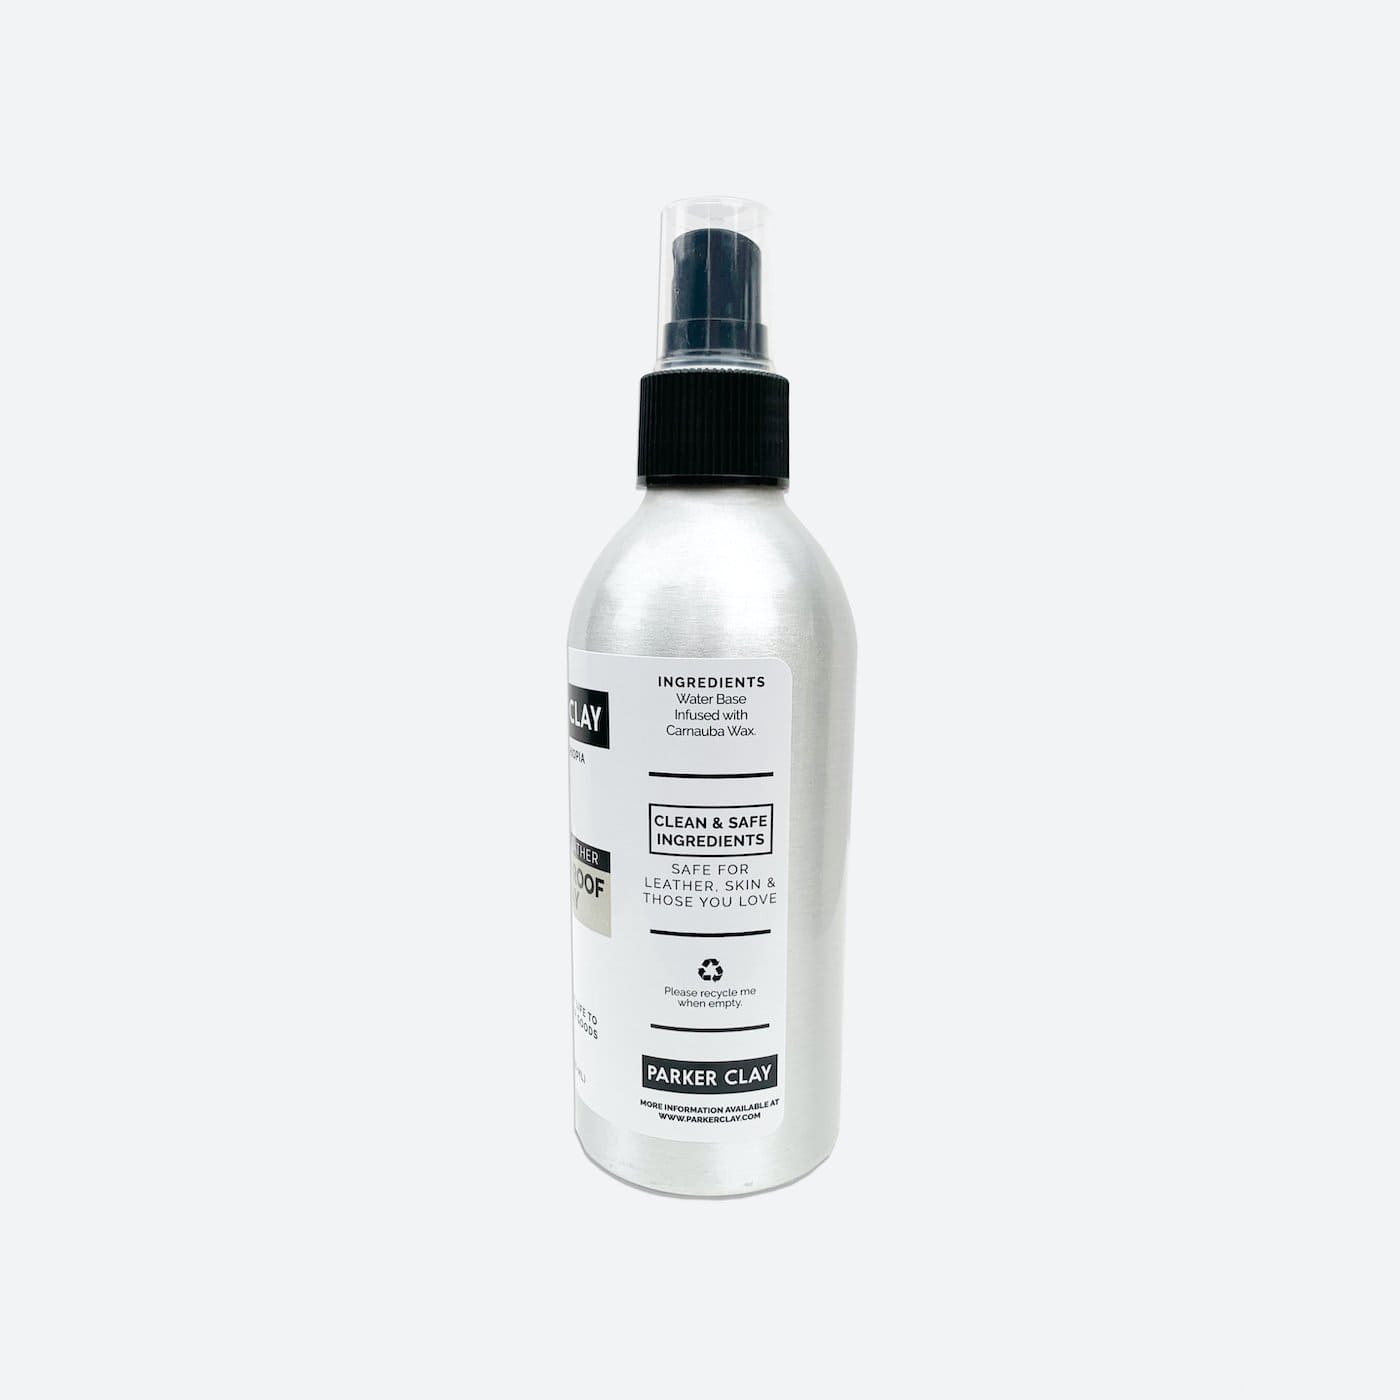 Premium Leather Waterproof Spray / 8 oz / Perfect for Handbags & Leather Goods / Parker Clay / Certified B Corp